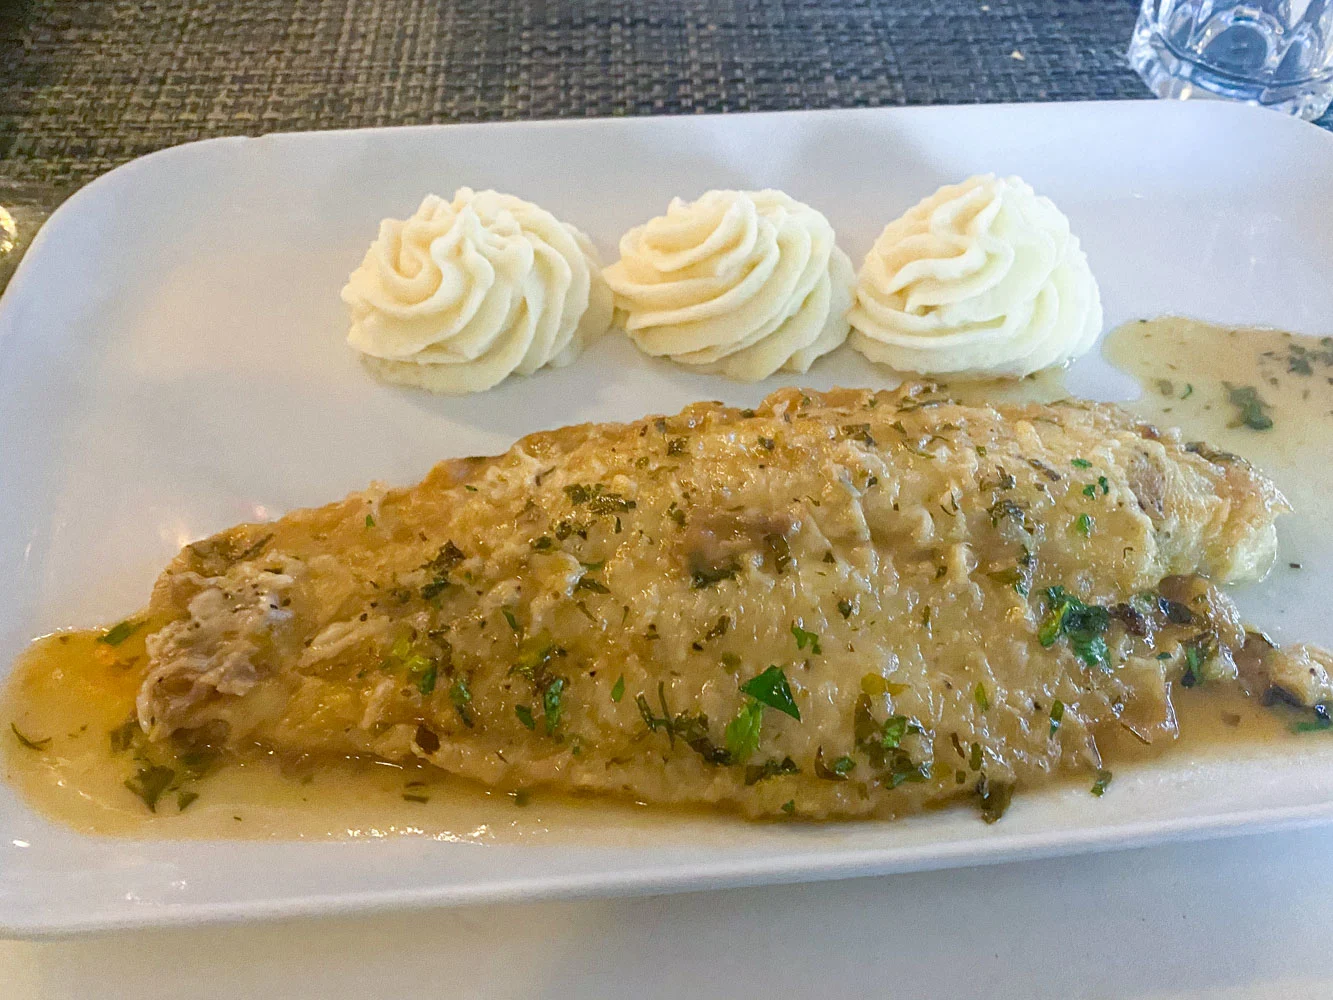 A sole and lemon dish at a local trattoria.